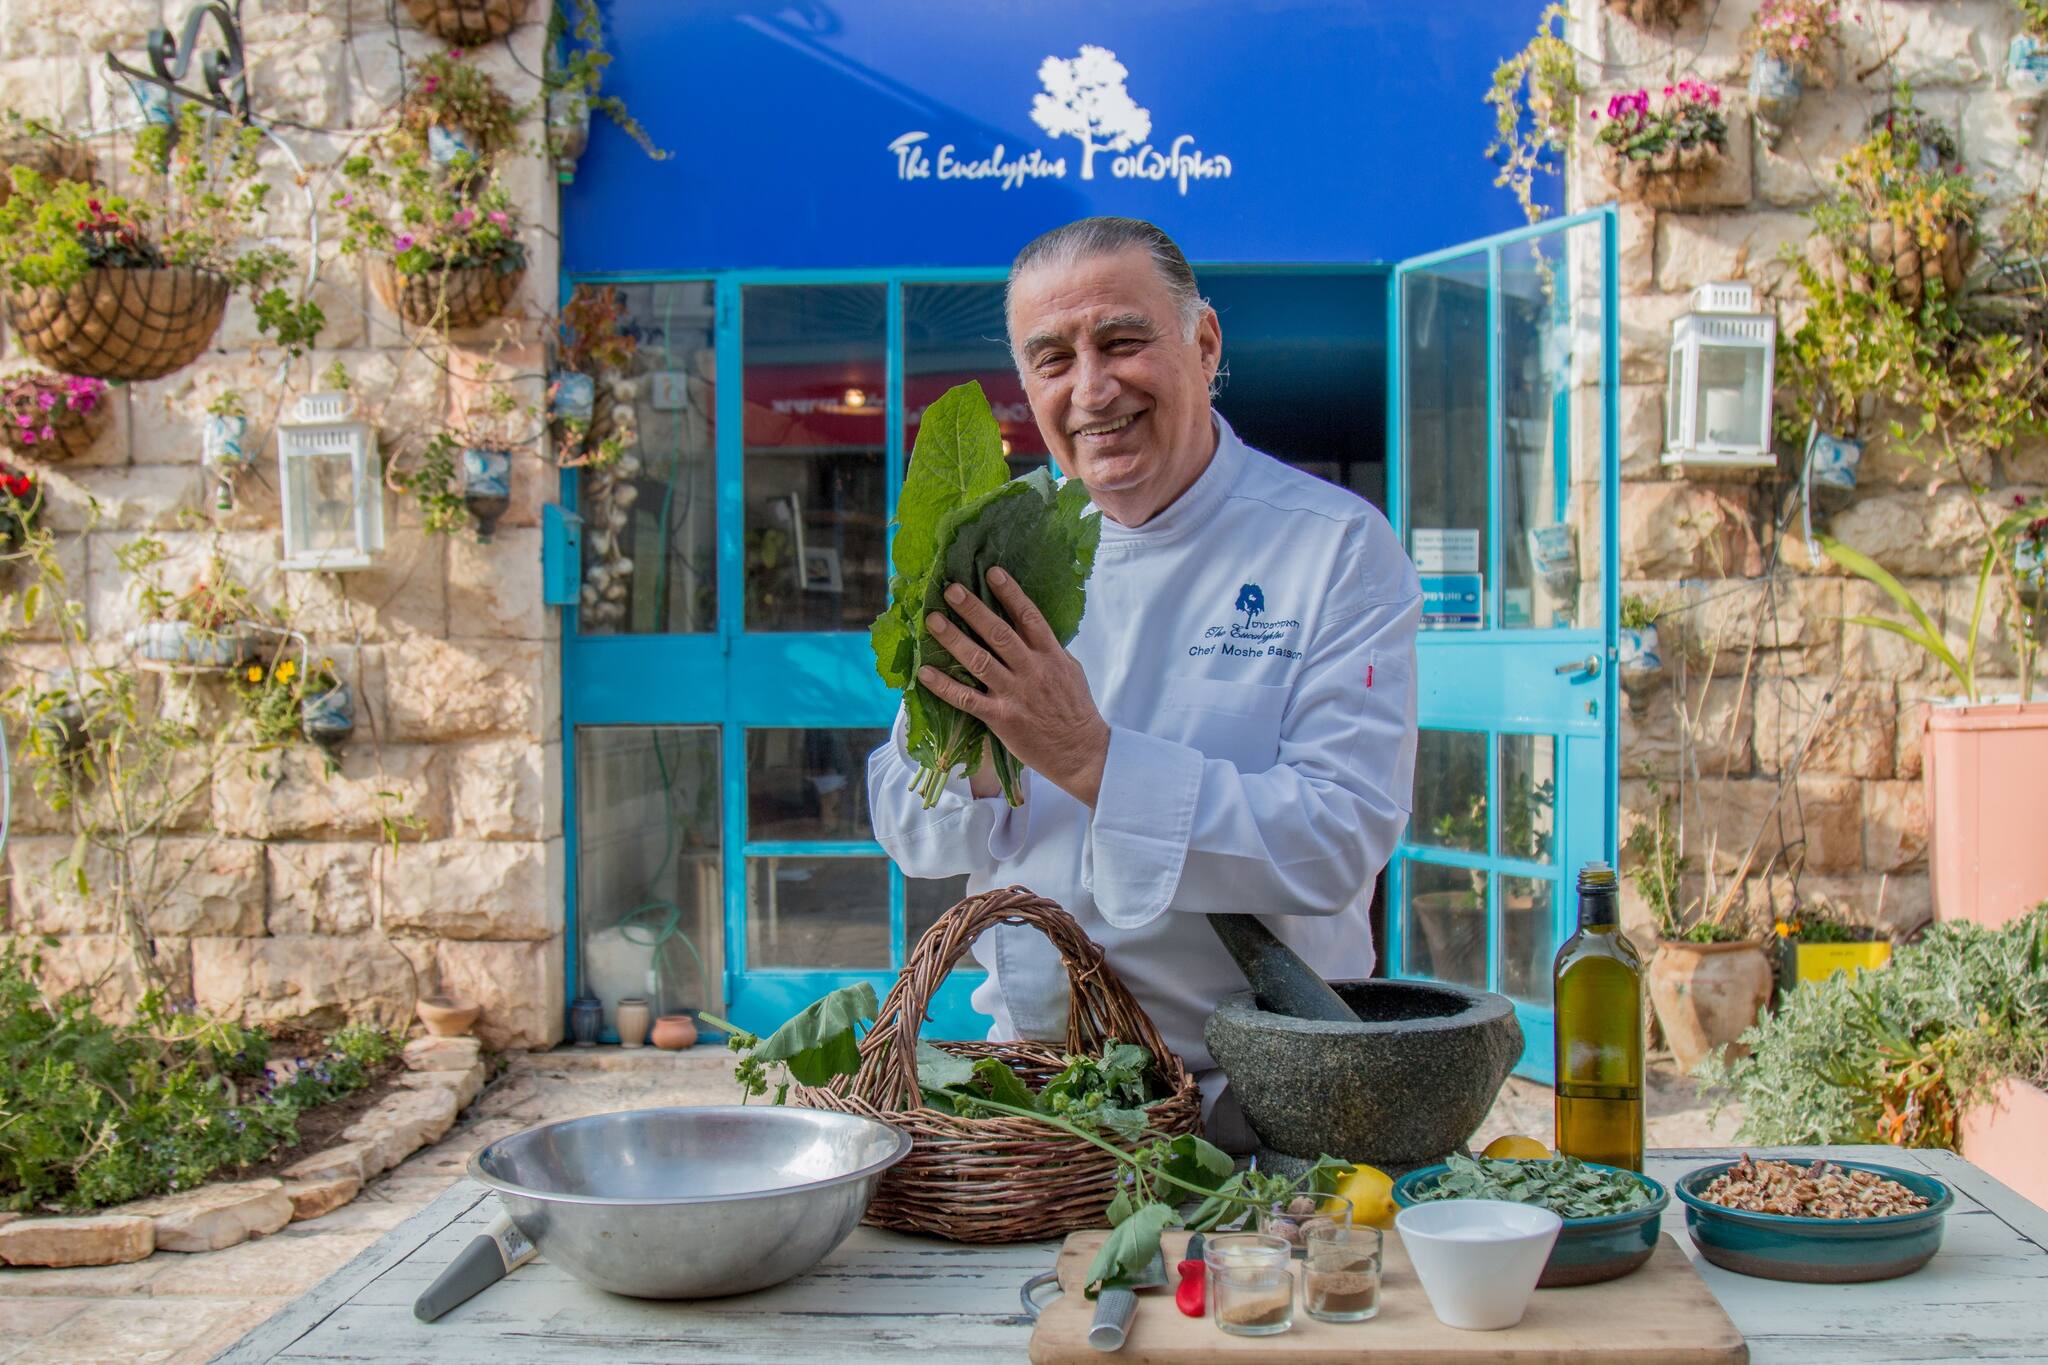 Chef Moshe Basson in front of The Eucalyptus, his restaurant in Jerusalem. (Photo credit: Ricki Rachman).